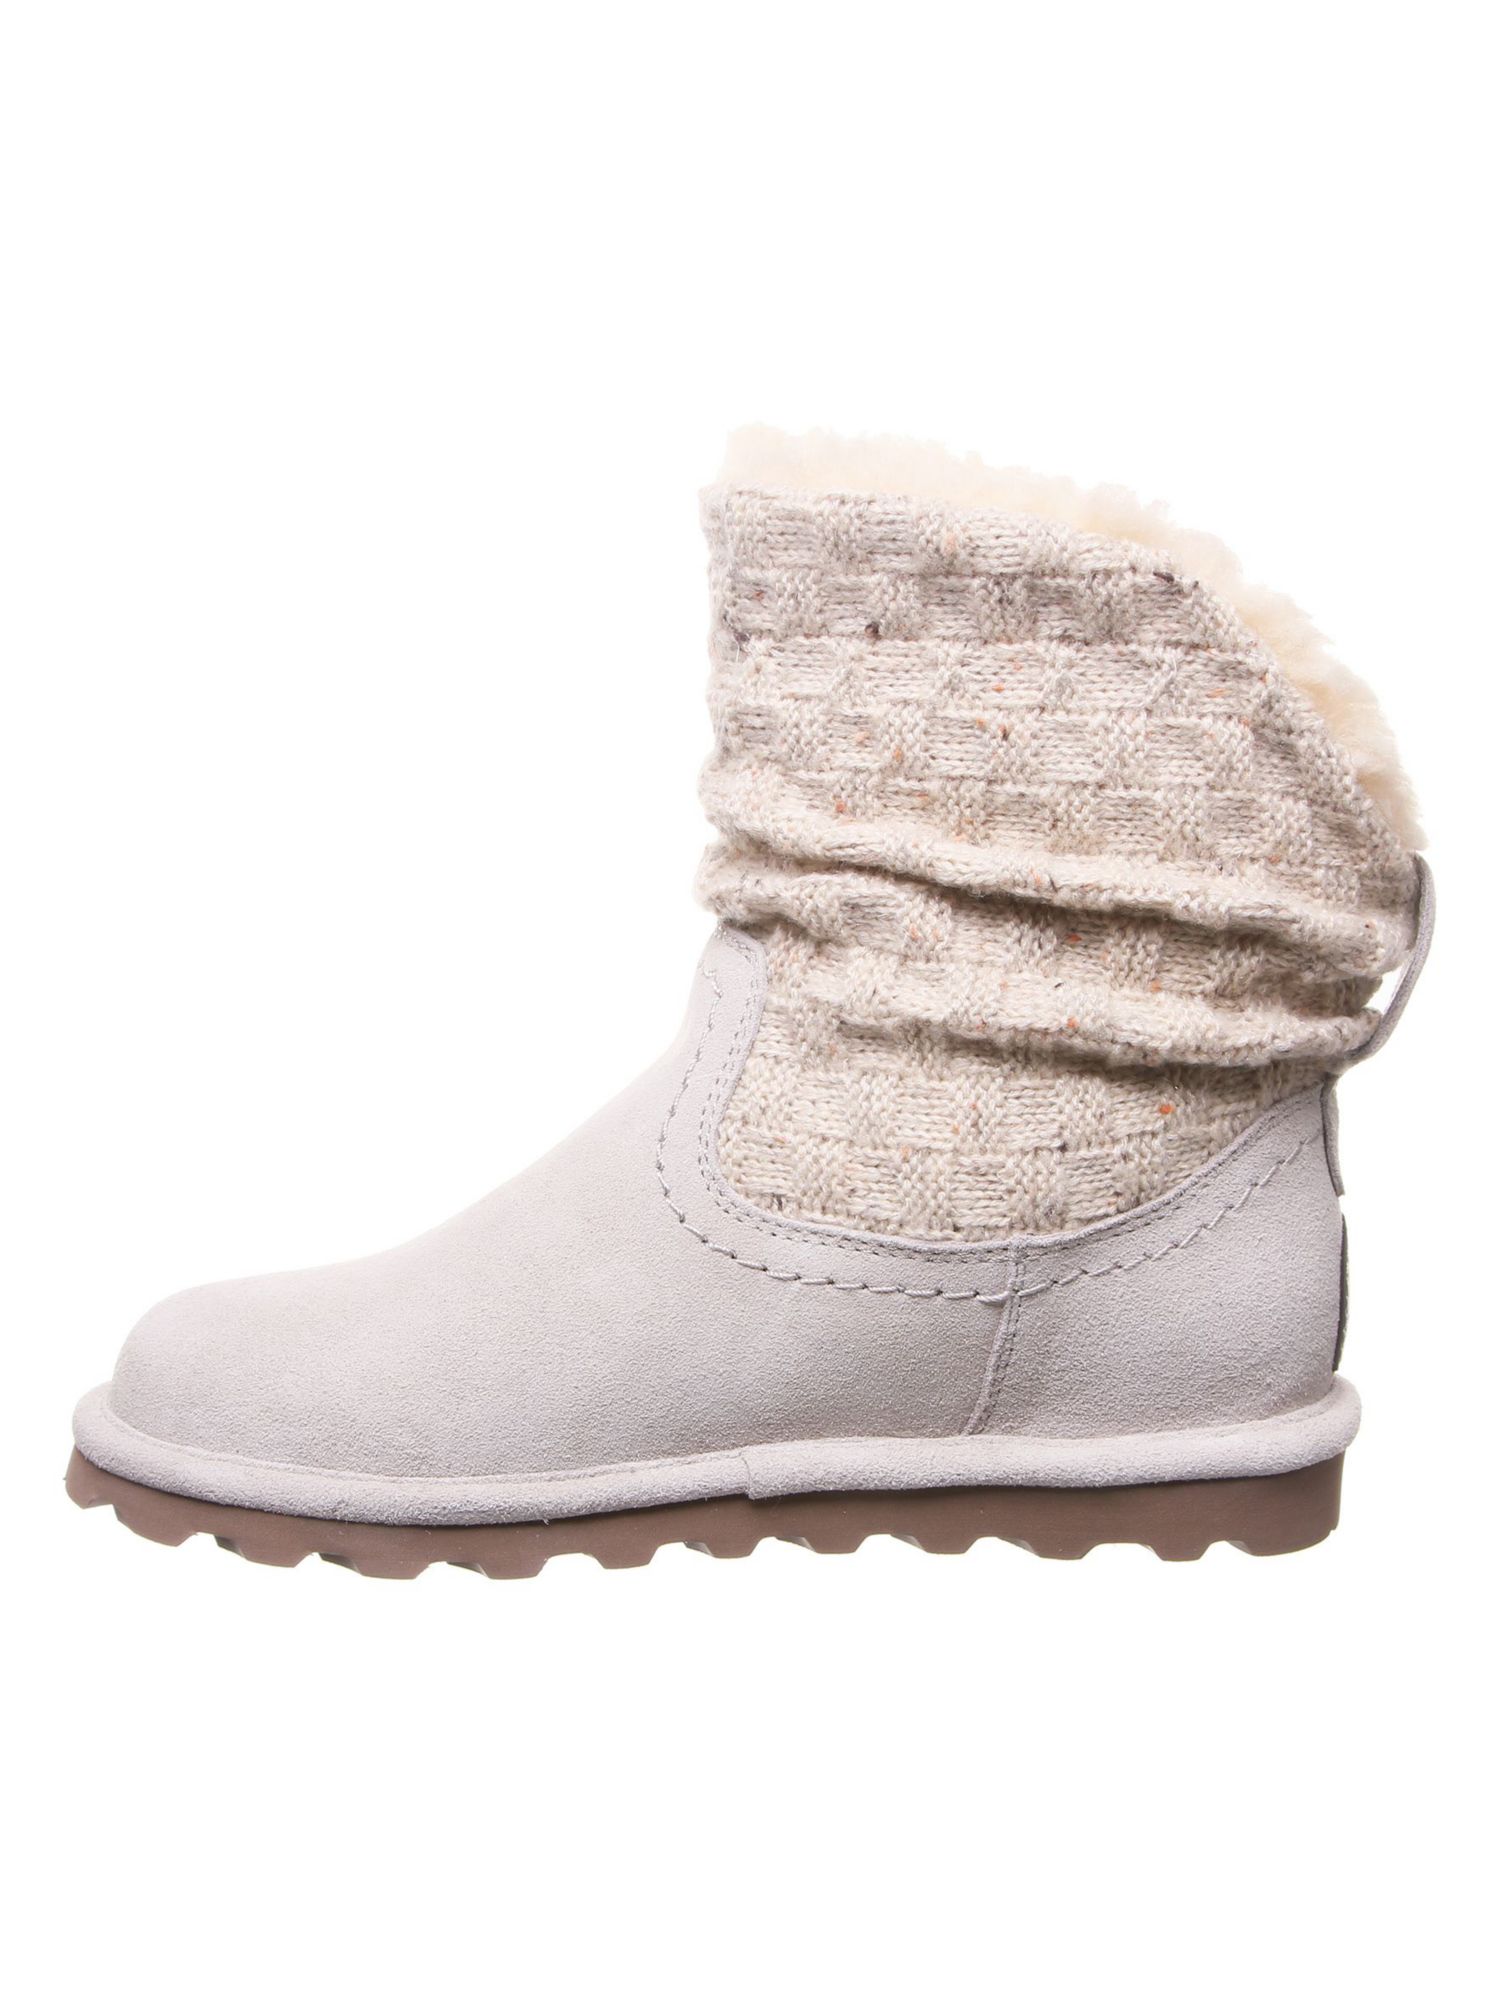 BEARPAW BEAR PAW Womens White Cushioned Ruched Virginia Round Toe Leather Boots Shoes 8